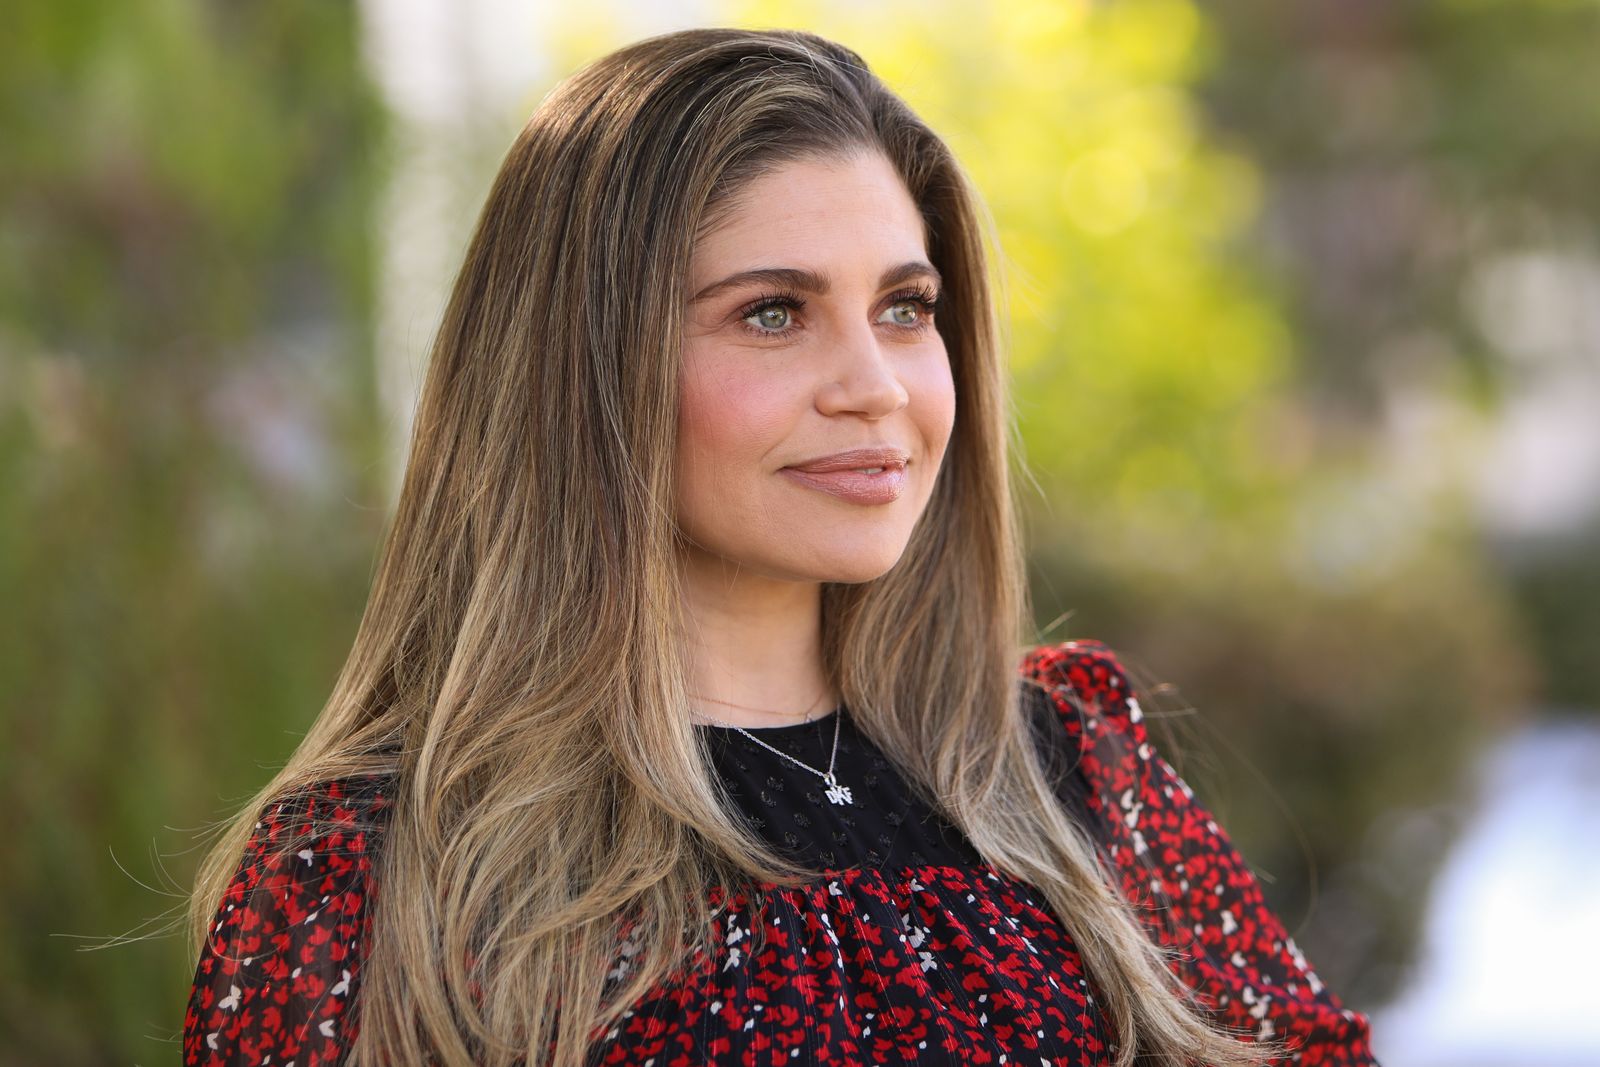 Danielle Fishel visits Hallmark Channel's "Home & Family" at Universal Studios Hollywood on January 28, 2020, in Universal City, California | Photo: Paul Archuleta/Getty Images